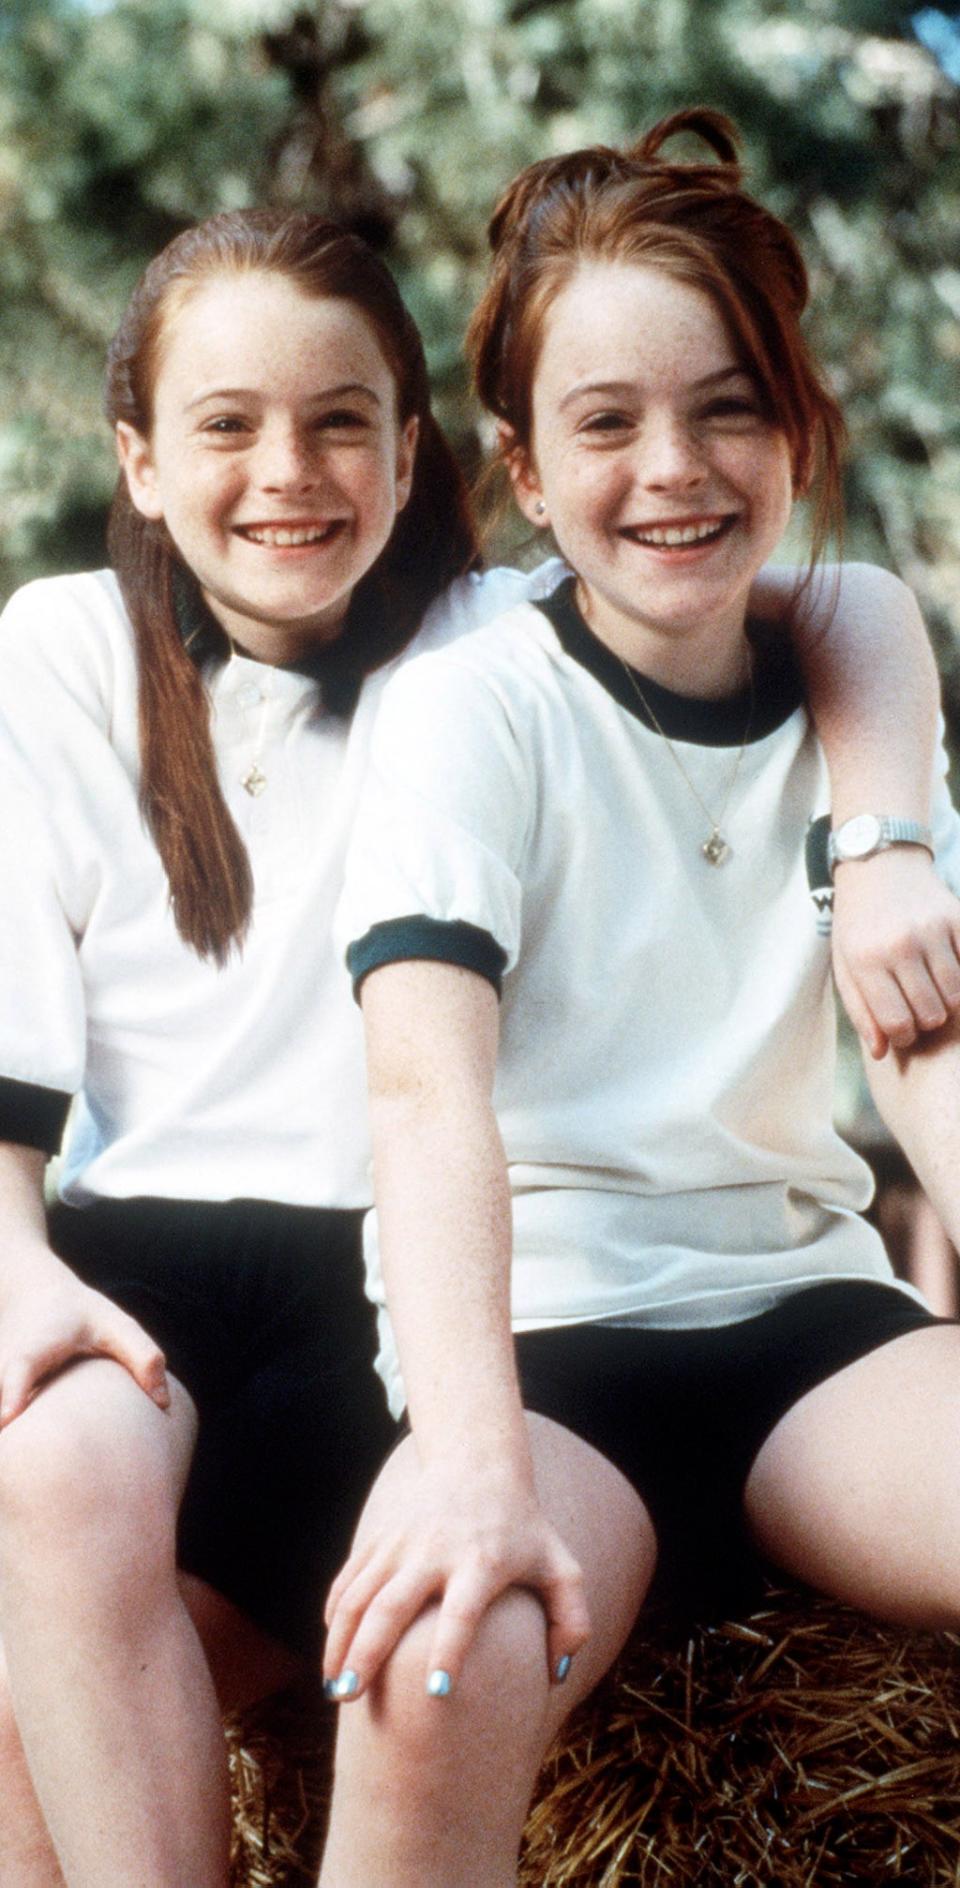 Lindsay Lohan in her star-making role as Annie and Hallie in ‘The Parent Trap' (Disney)